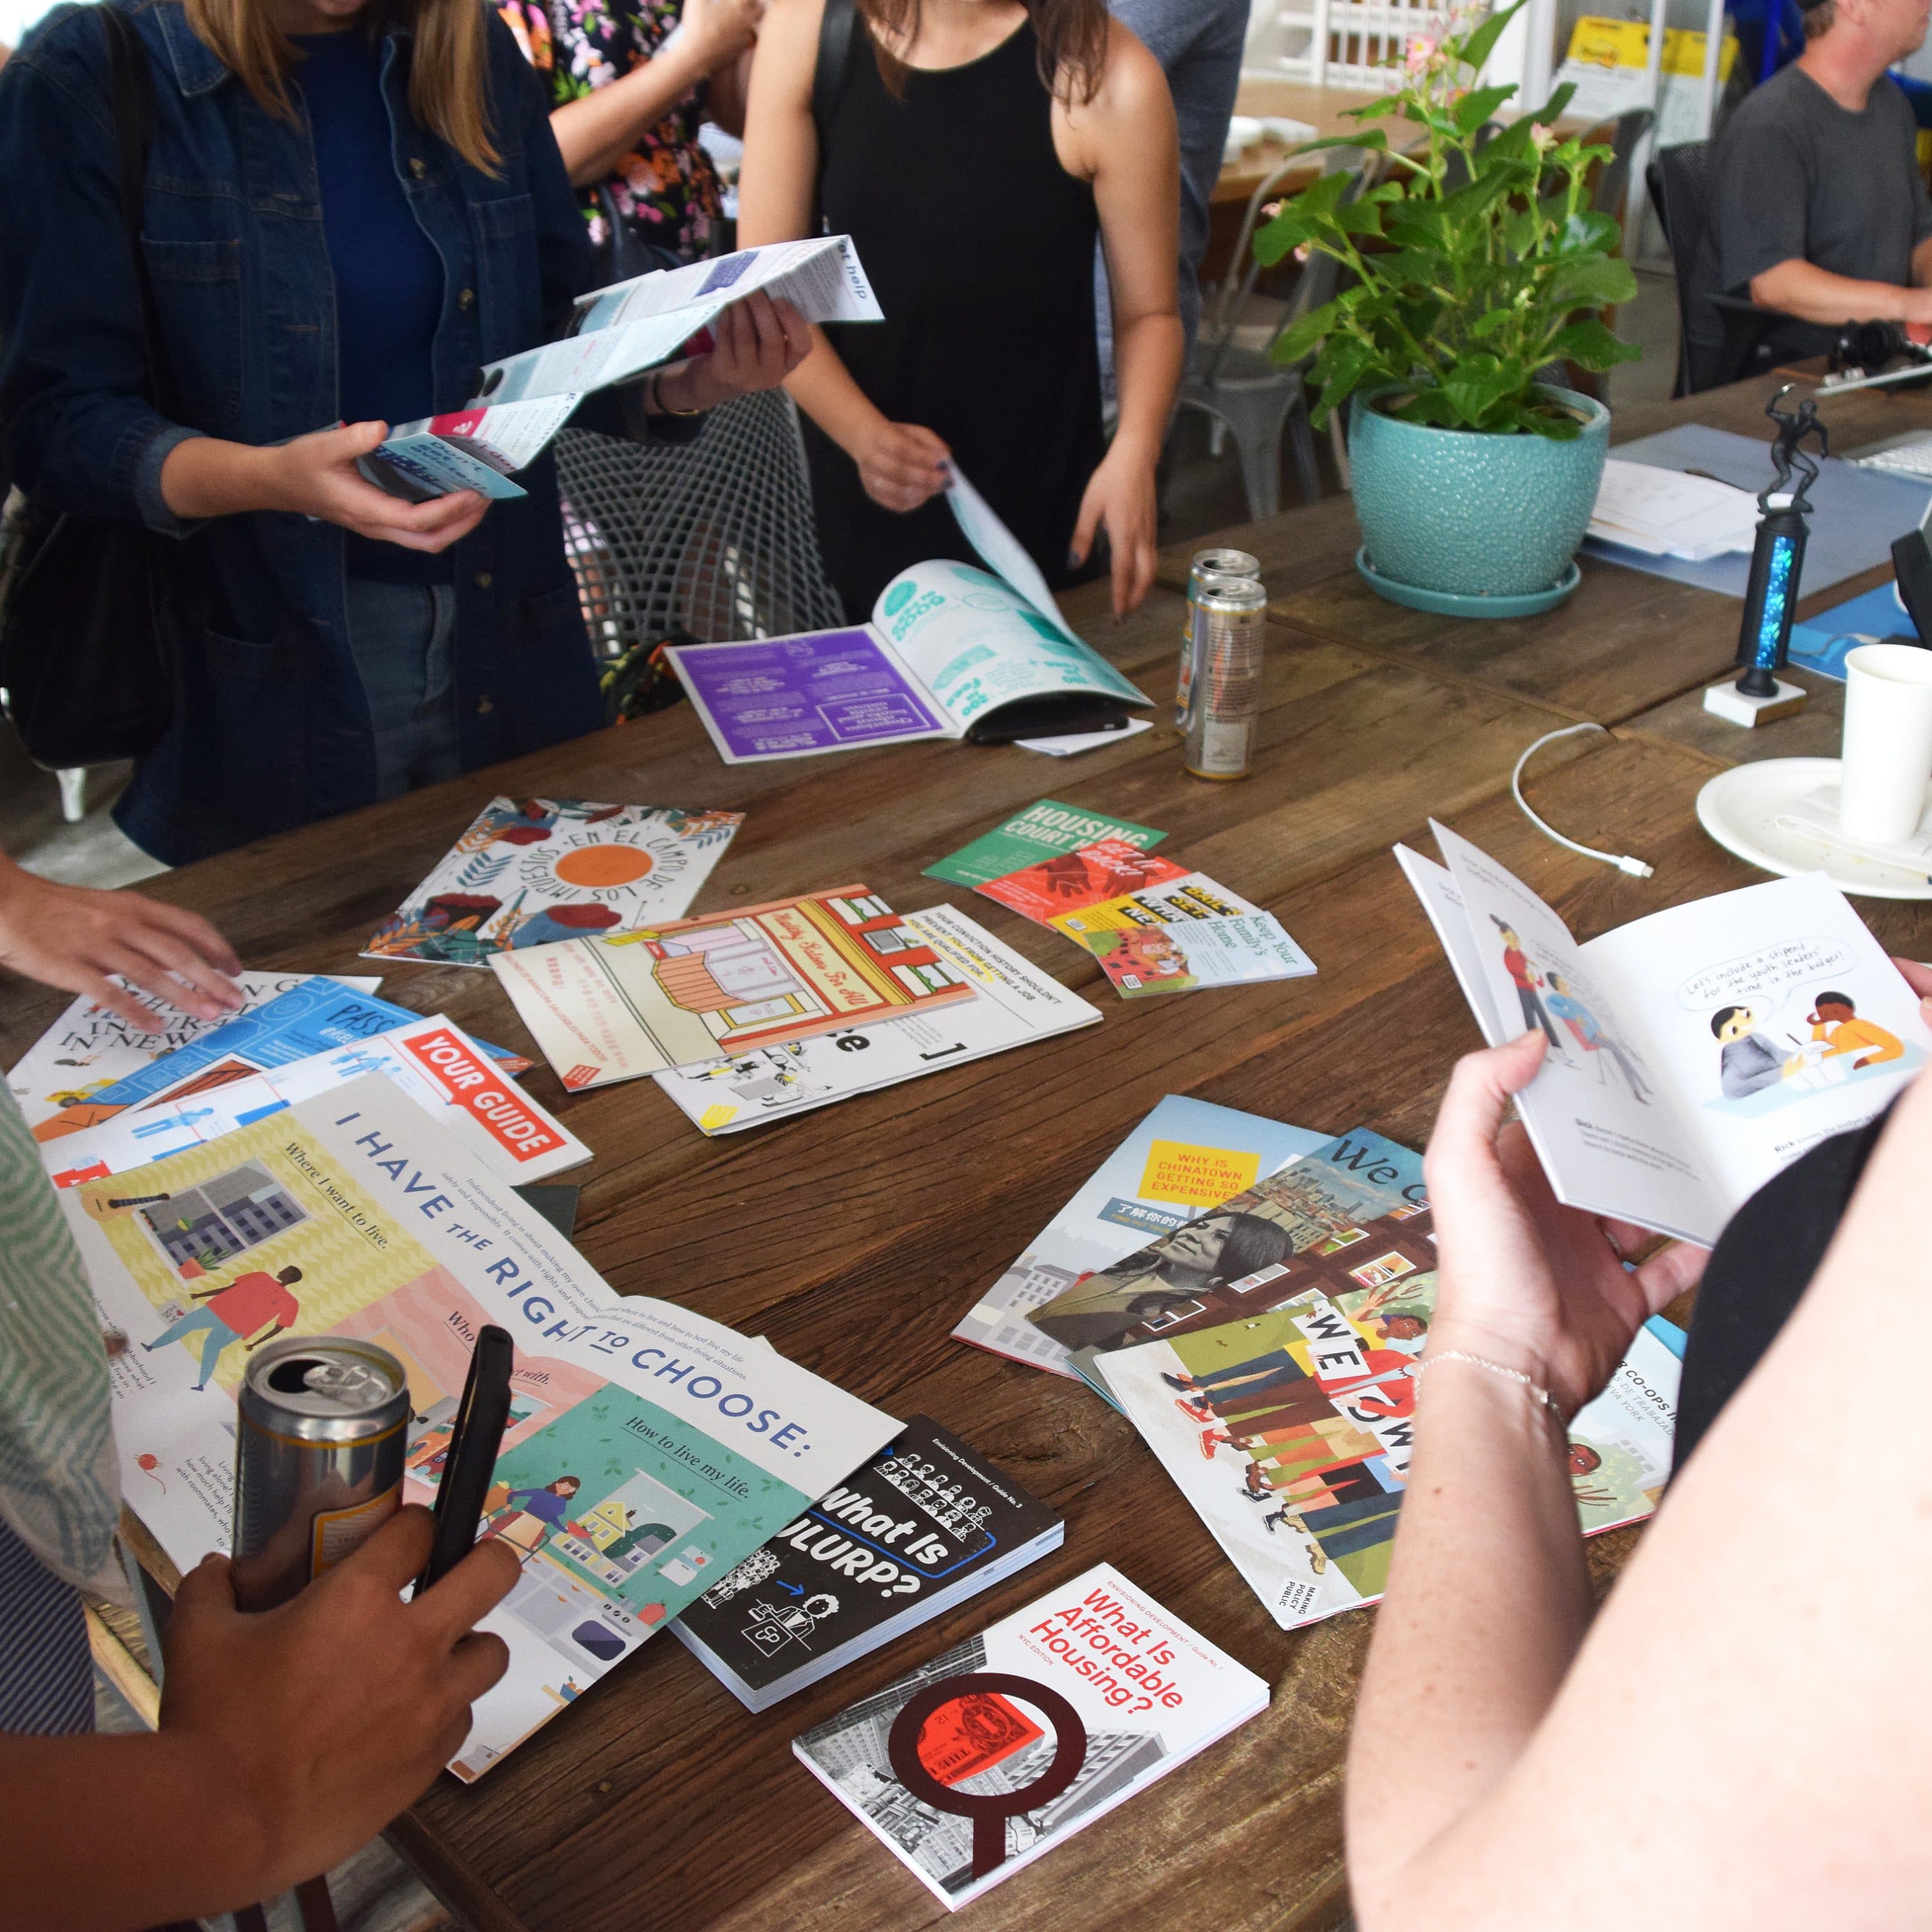 A group of people stand around a table covered with various pamphlets, leaflets, and magazines. Some individuals are reading through the materials, while others are looking or reaching for items. A potted plant and a candle are on the table among the clutter.